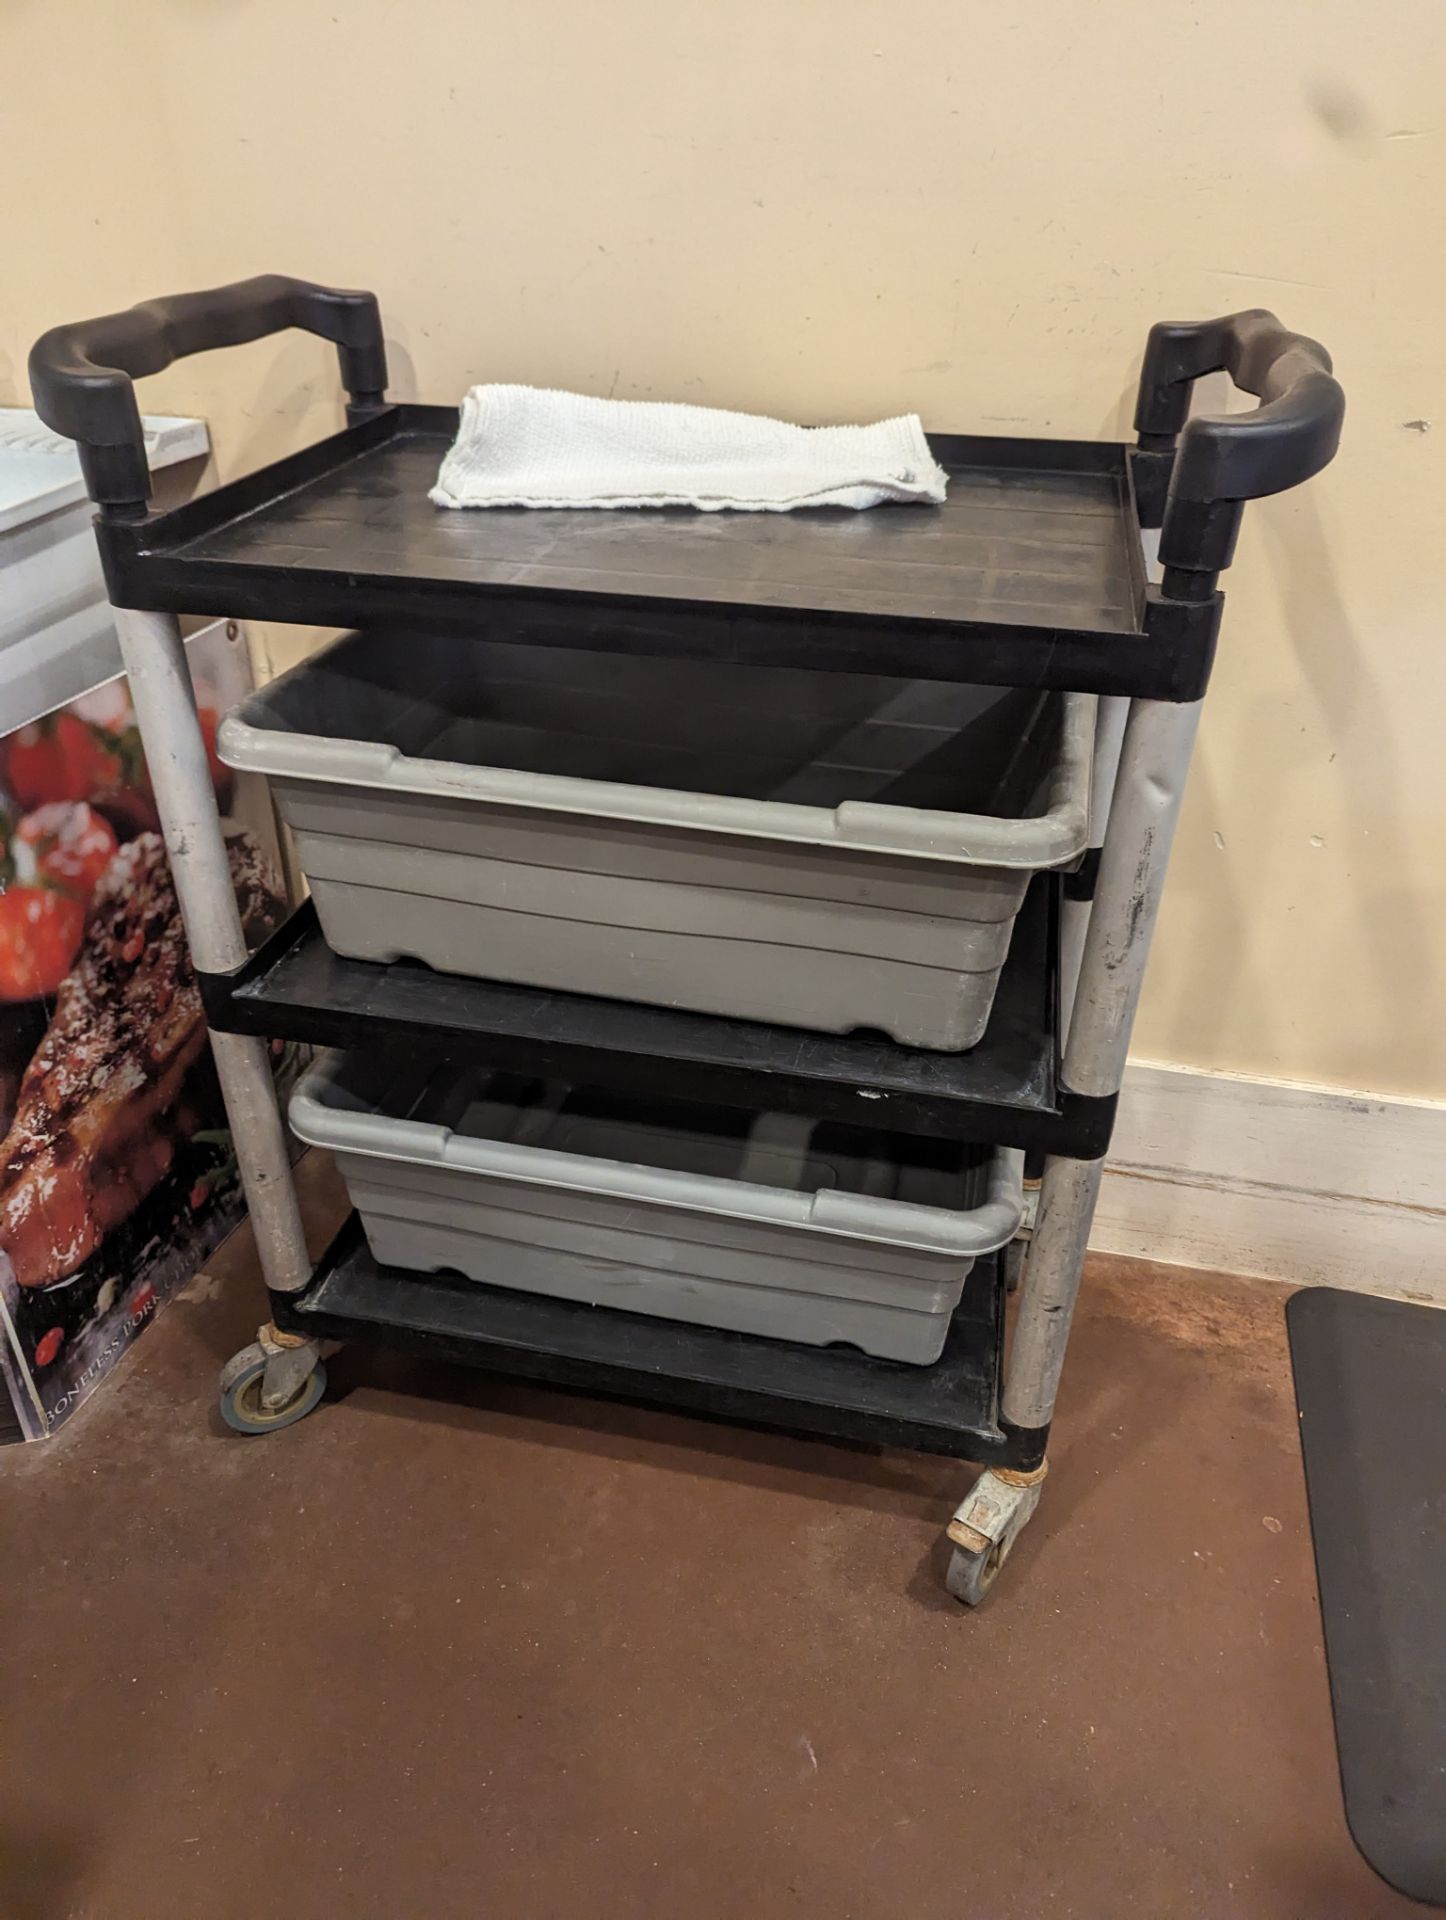 3 Tier Bussing Cart